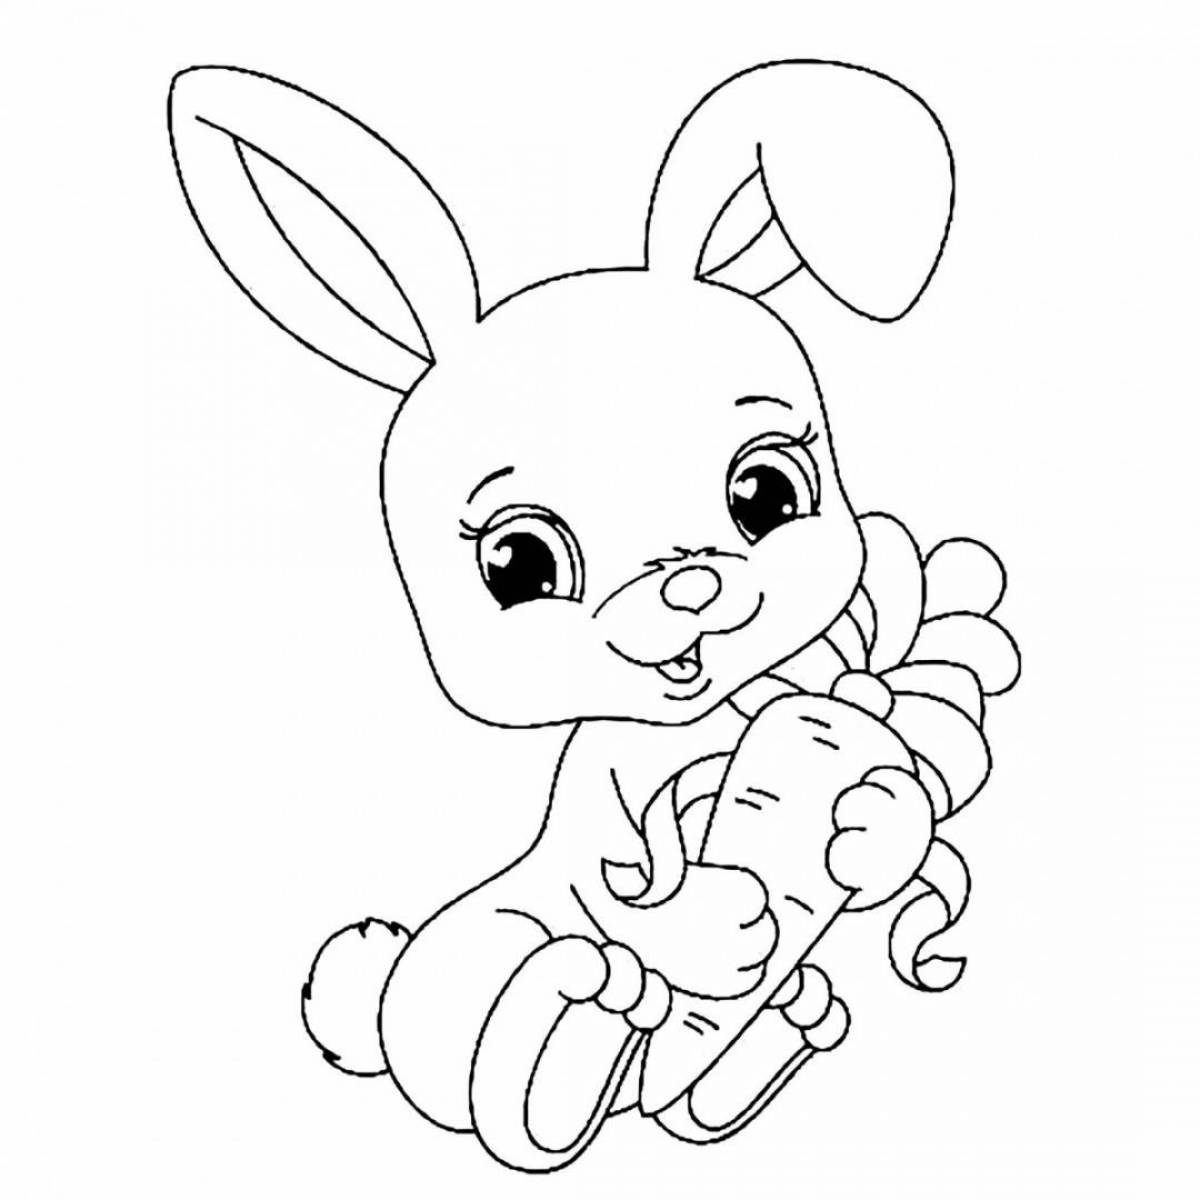 Wonderful rabbit coloring book for kids 3-4 years old